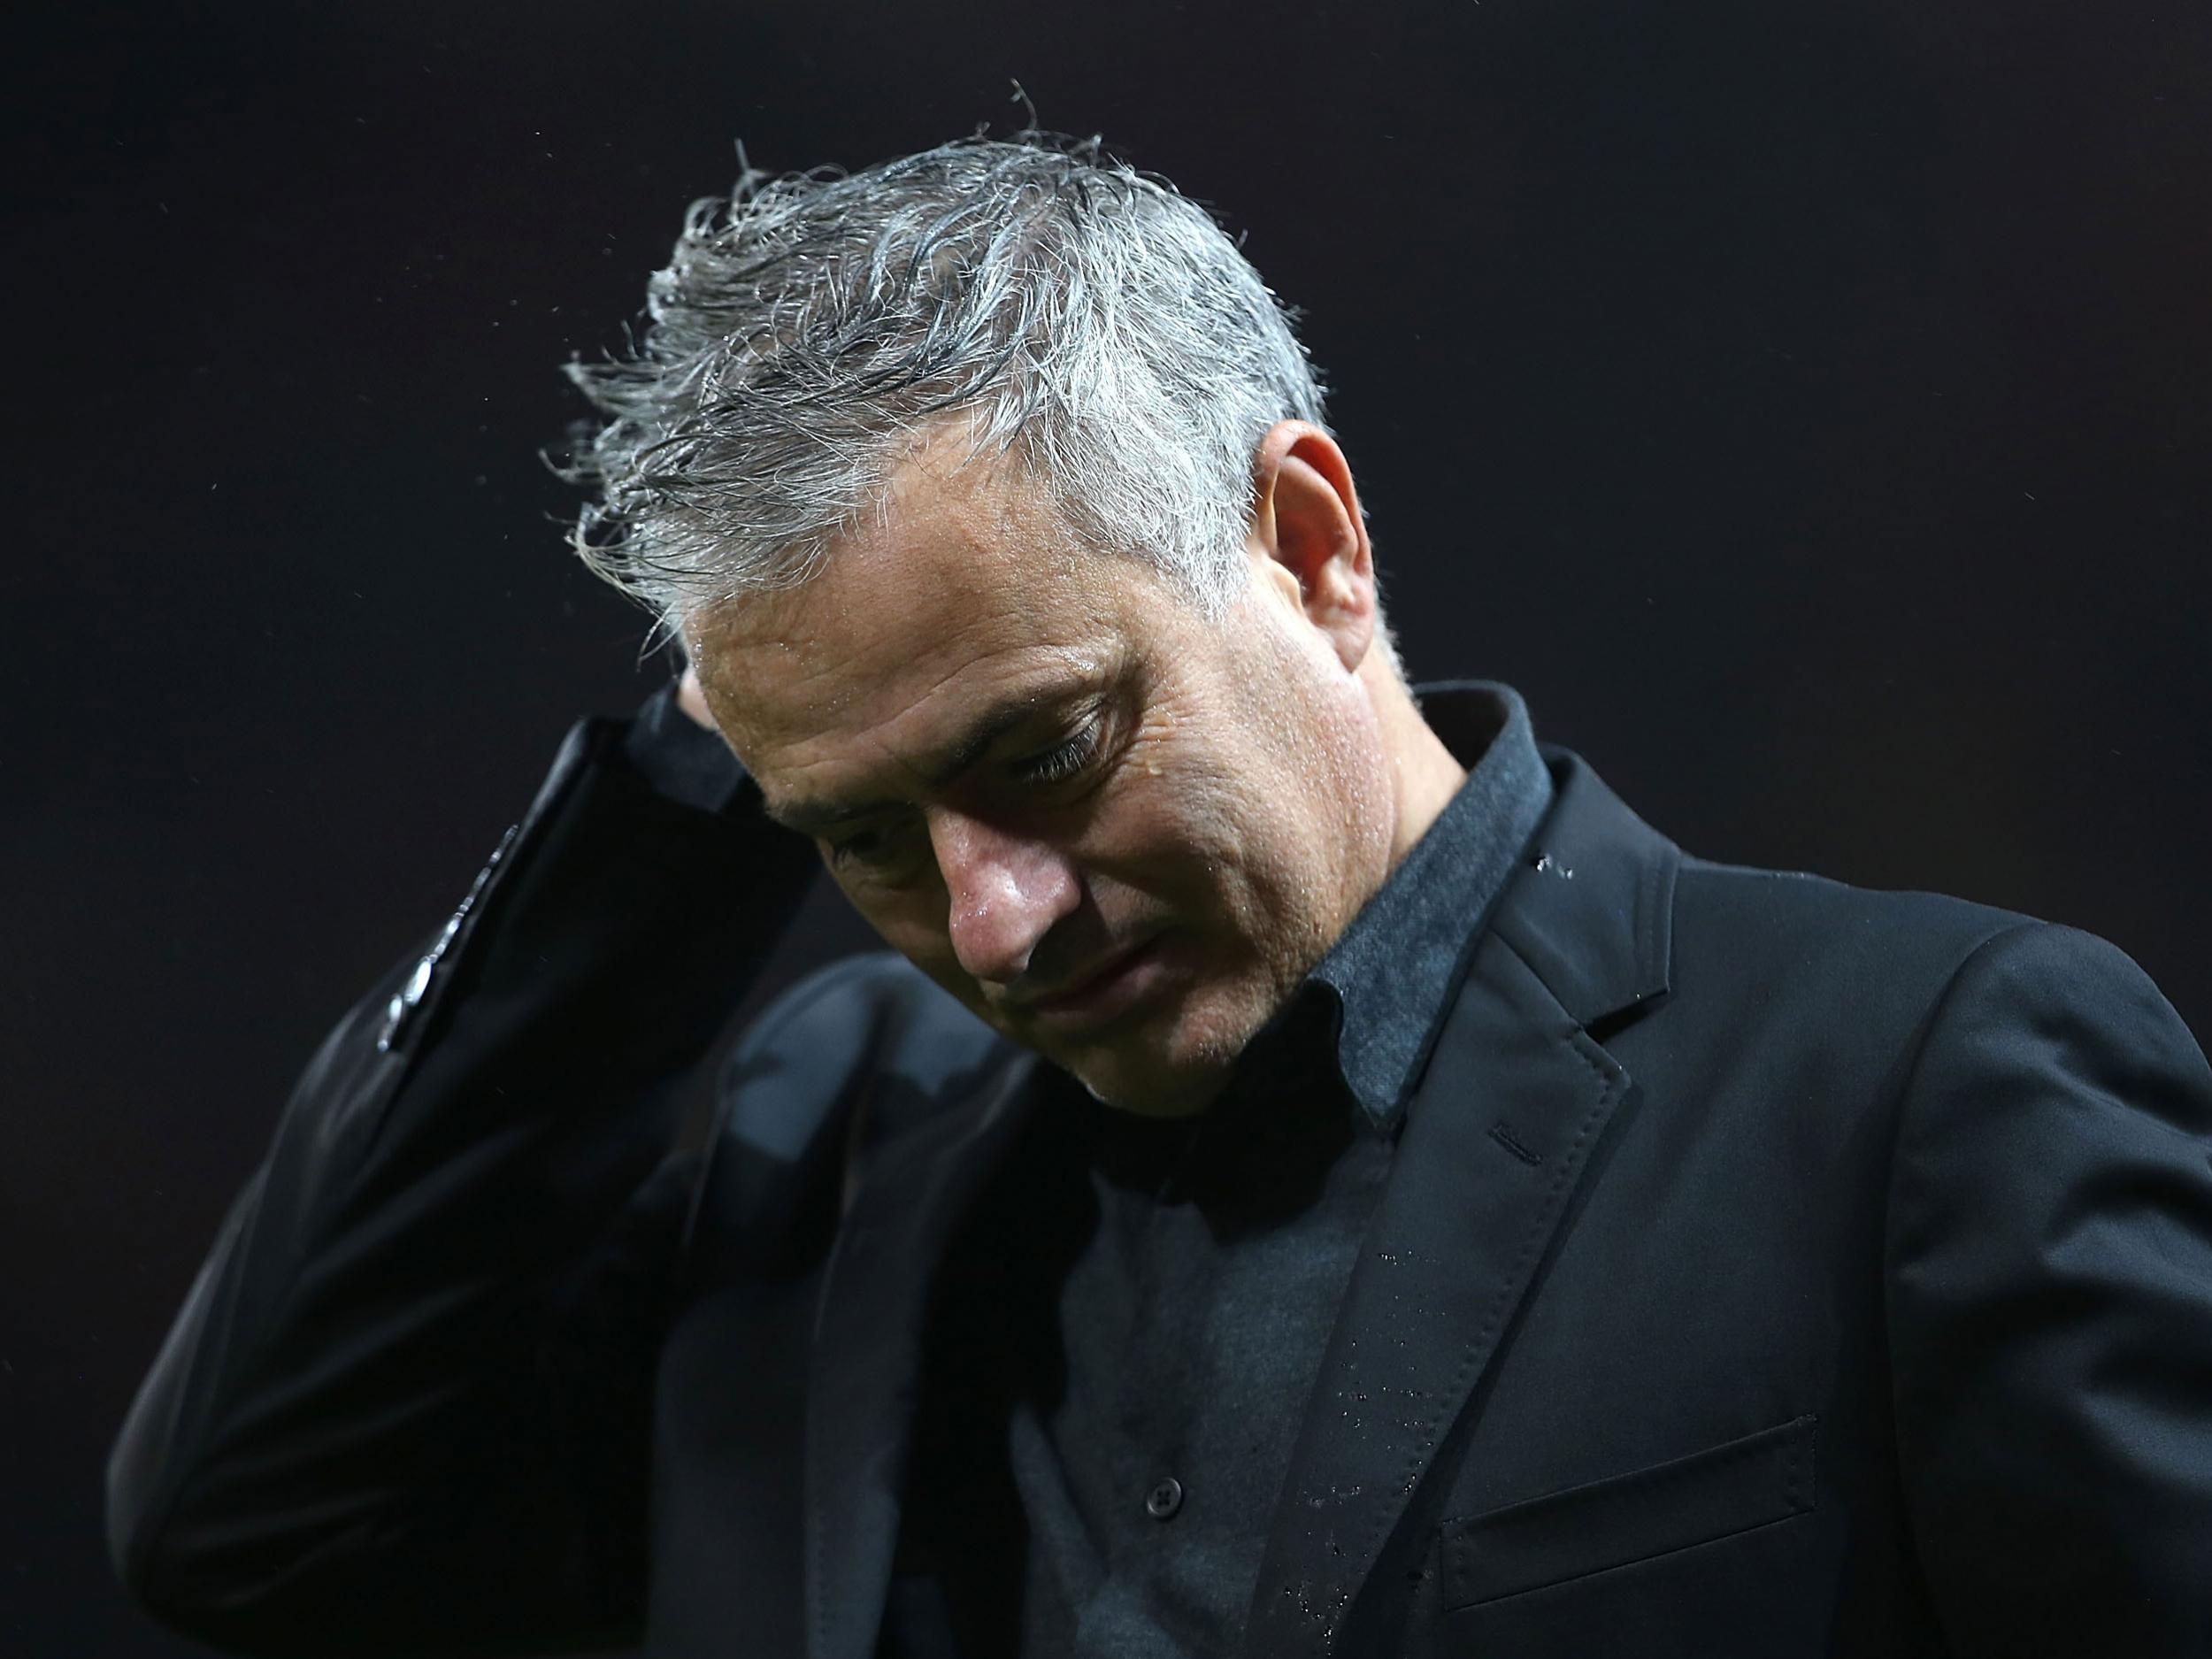 Jose Mourinho believes Manchester United and other English clubs are at a disadvantage